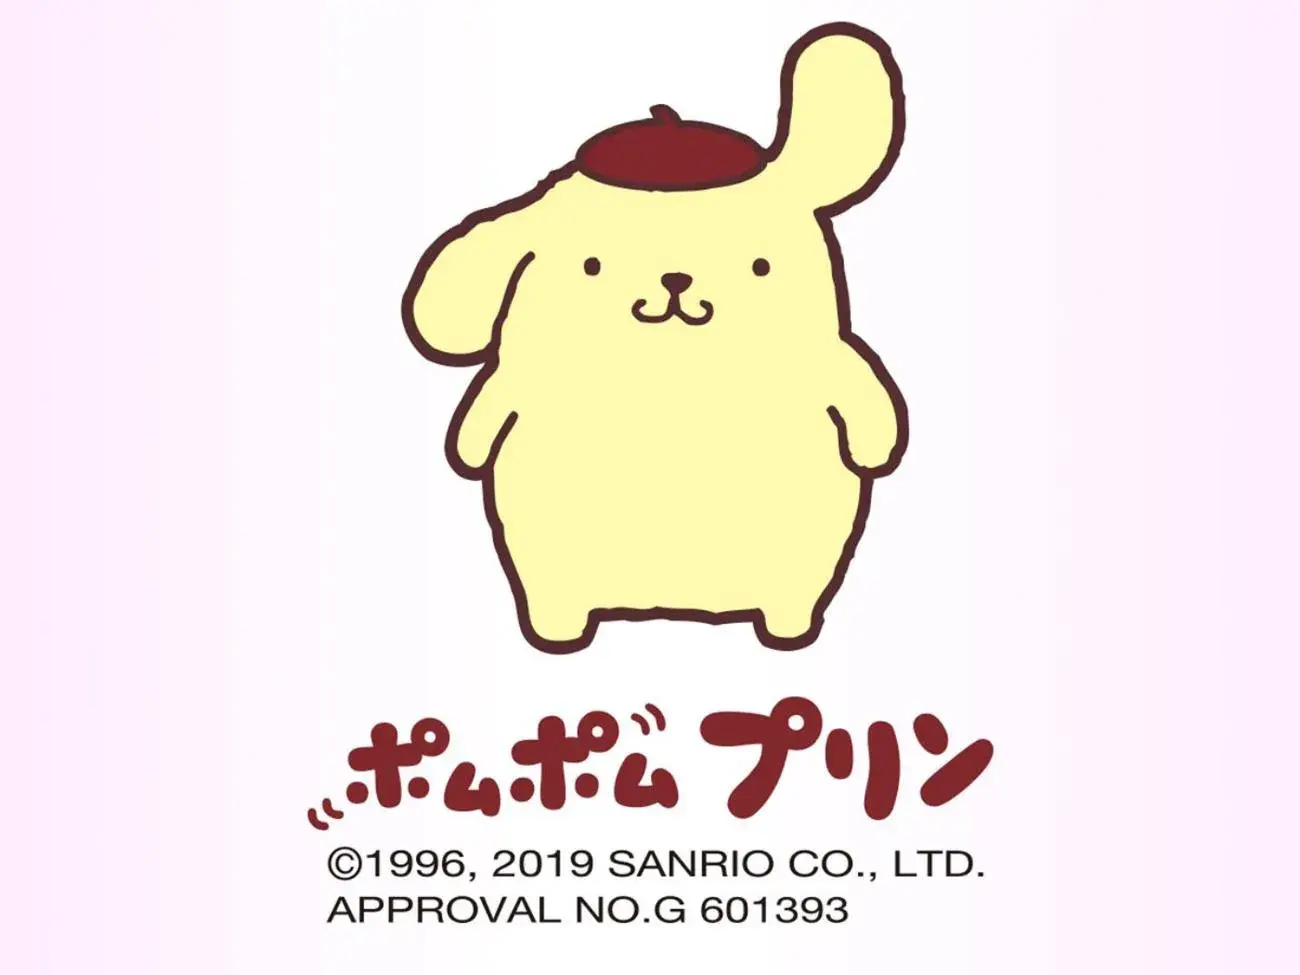 Logo/Certificate/Sign in Hotel Okinawa With Sanrio Characters